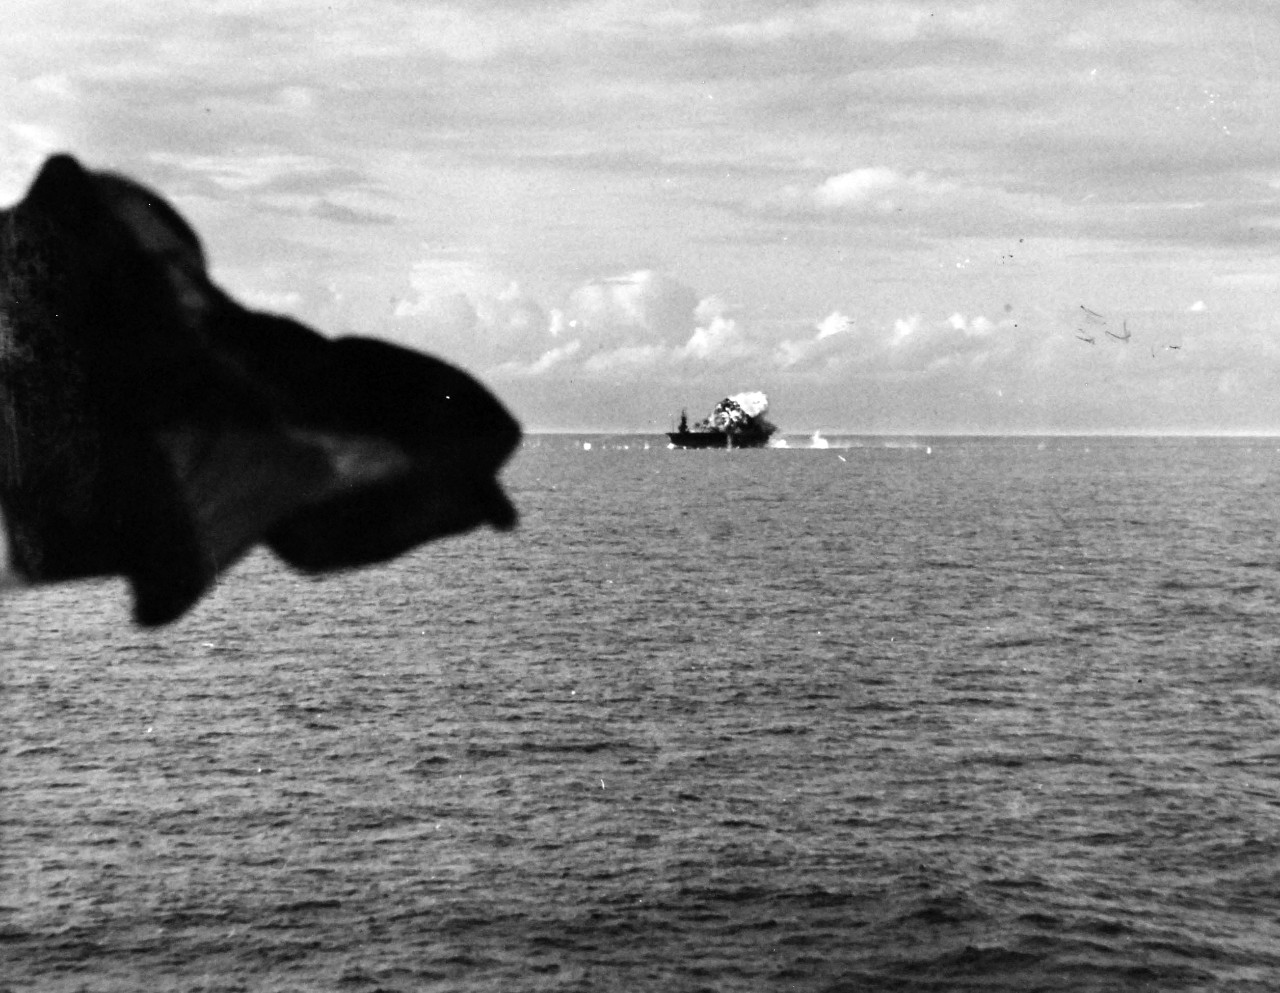 80-G-270663:  Battle off Samar, Japanese Kamikaze, October 25, 1944.   Japanese suicide plane attacking USS Santee (CVE-29), hitting after end of flight deck off Leyte Gulf.  As seen from USS Suwannee (CVE-27), 25 October 1944.  Official U.S. Navy Photograph, now in the collections of the National Archives.   (2014/4/24). 